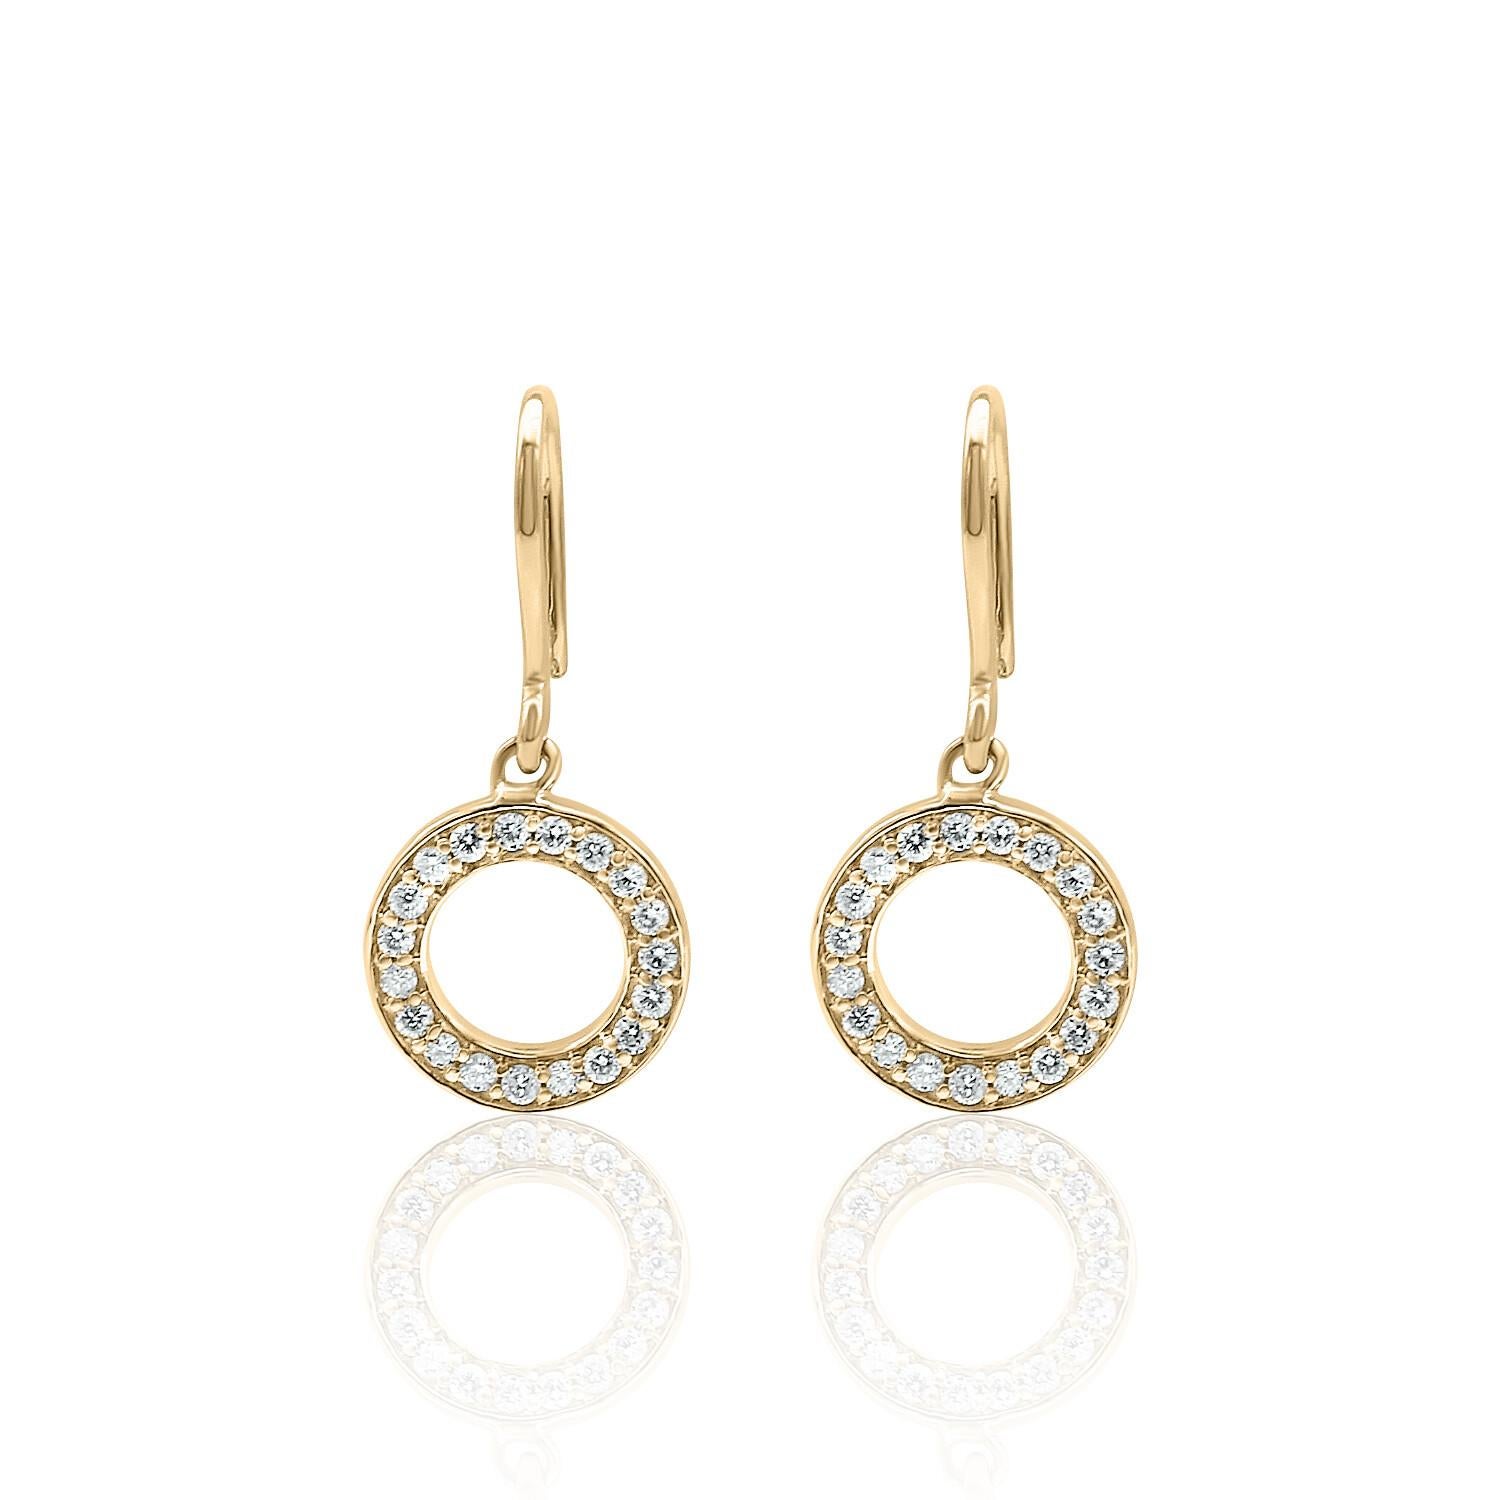 Round Cut Circle Drop Diamond Earrings 14K White, Yellow, and Rose Gold